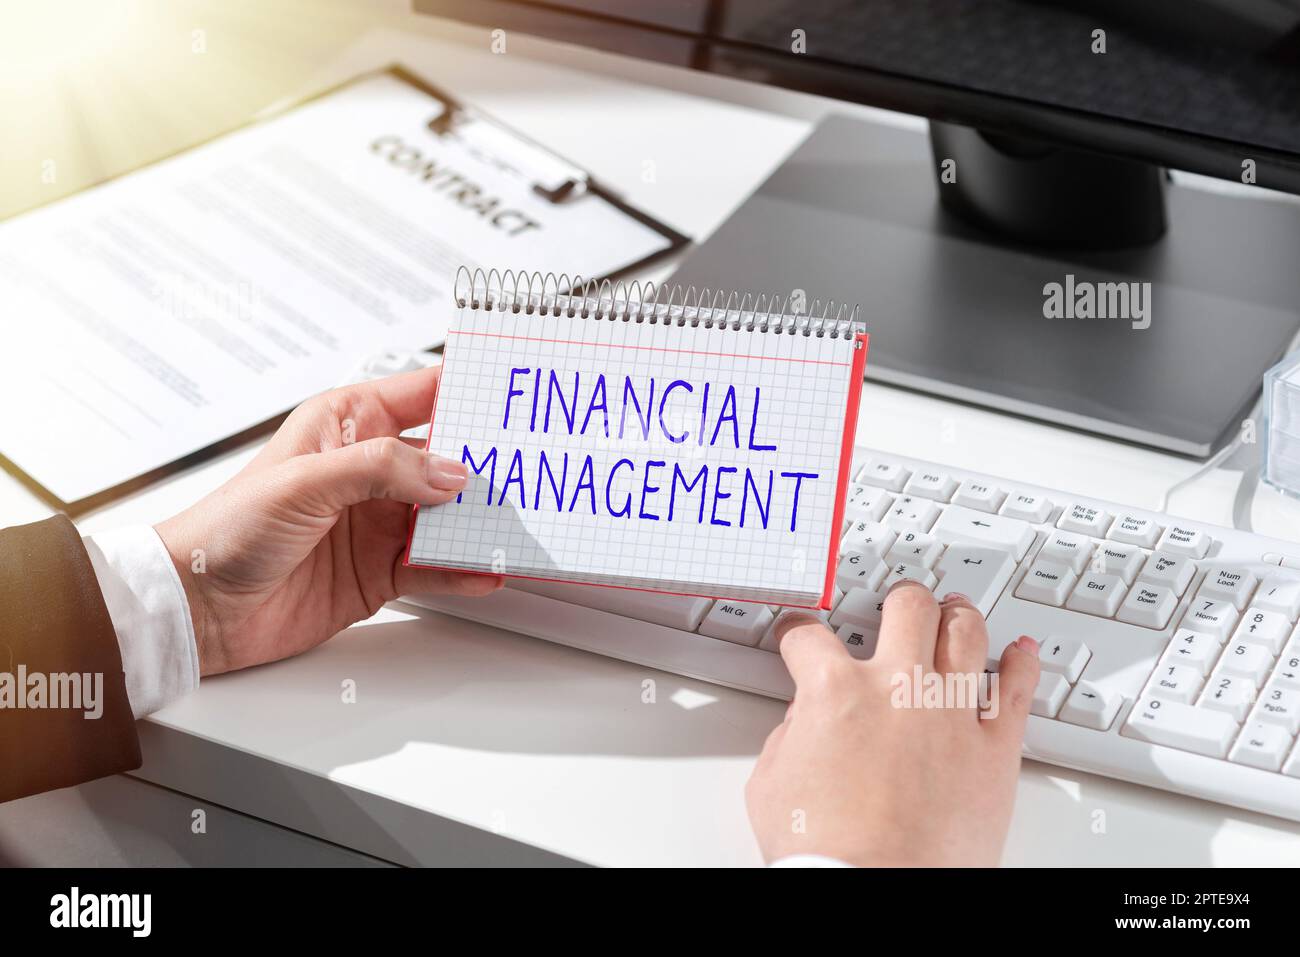 Sign displaying Financial Management, Business concept efficient and effective way to Manage Money and Funds Stock Photo